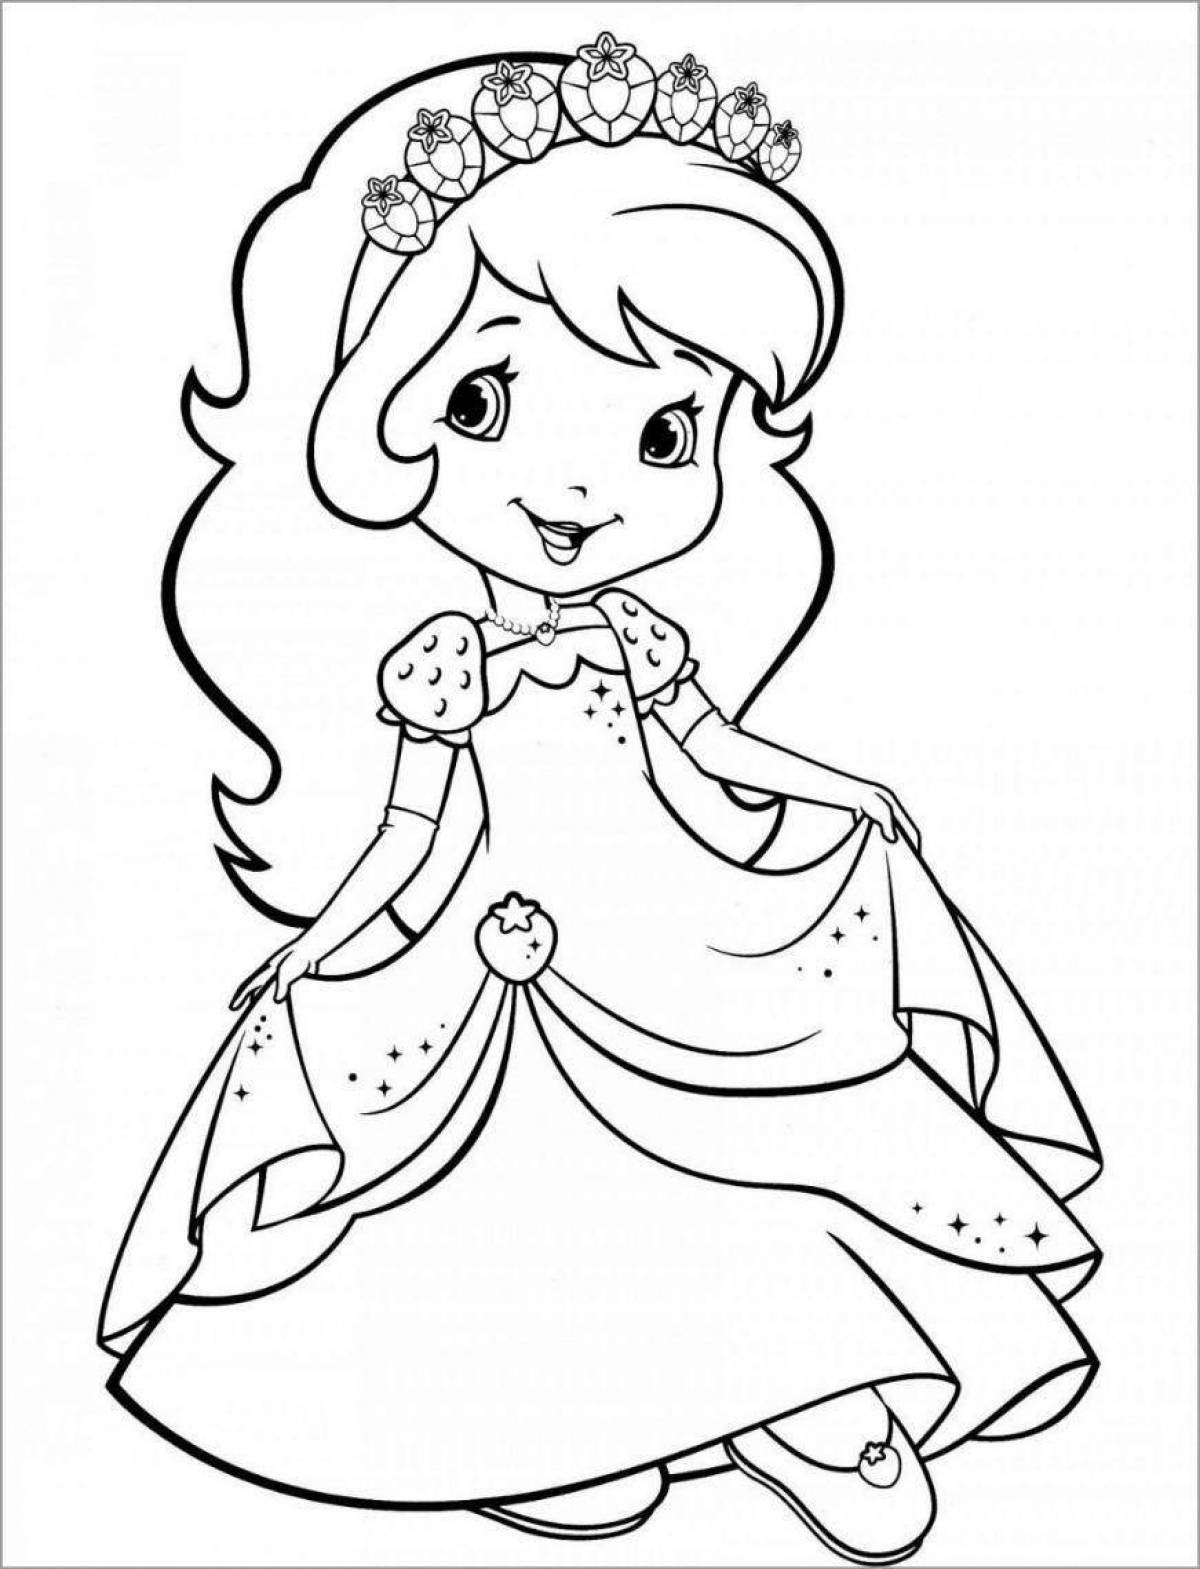 Gorgeous princess coloring pictures